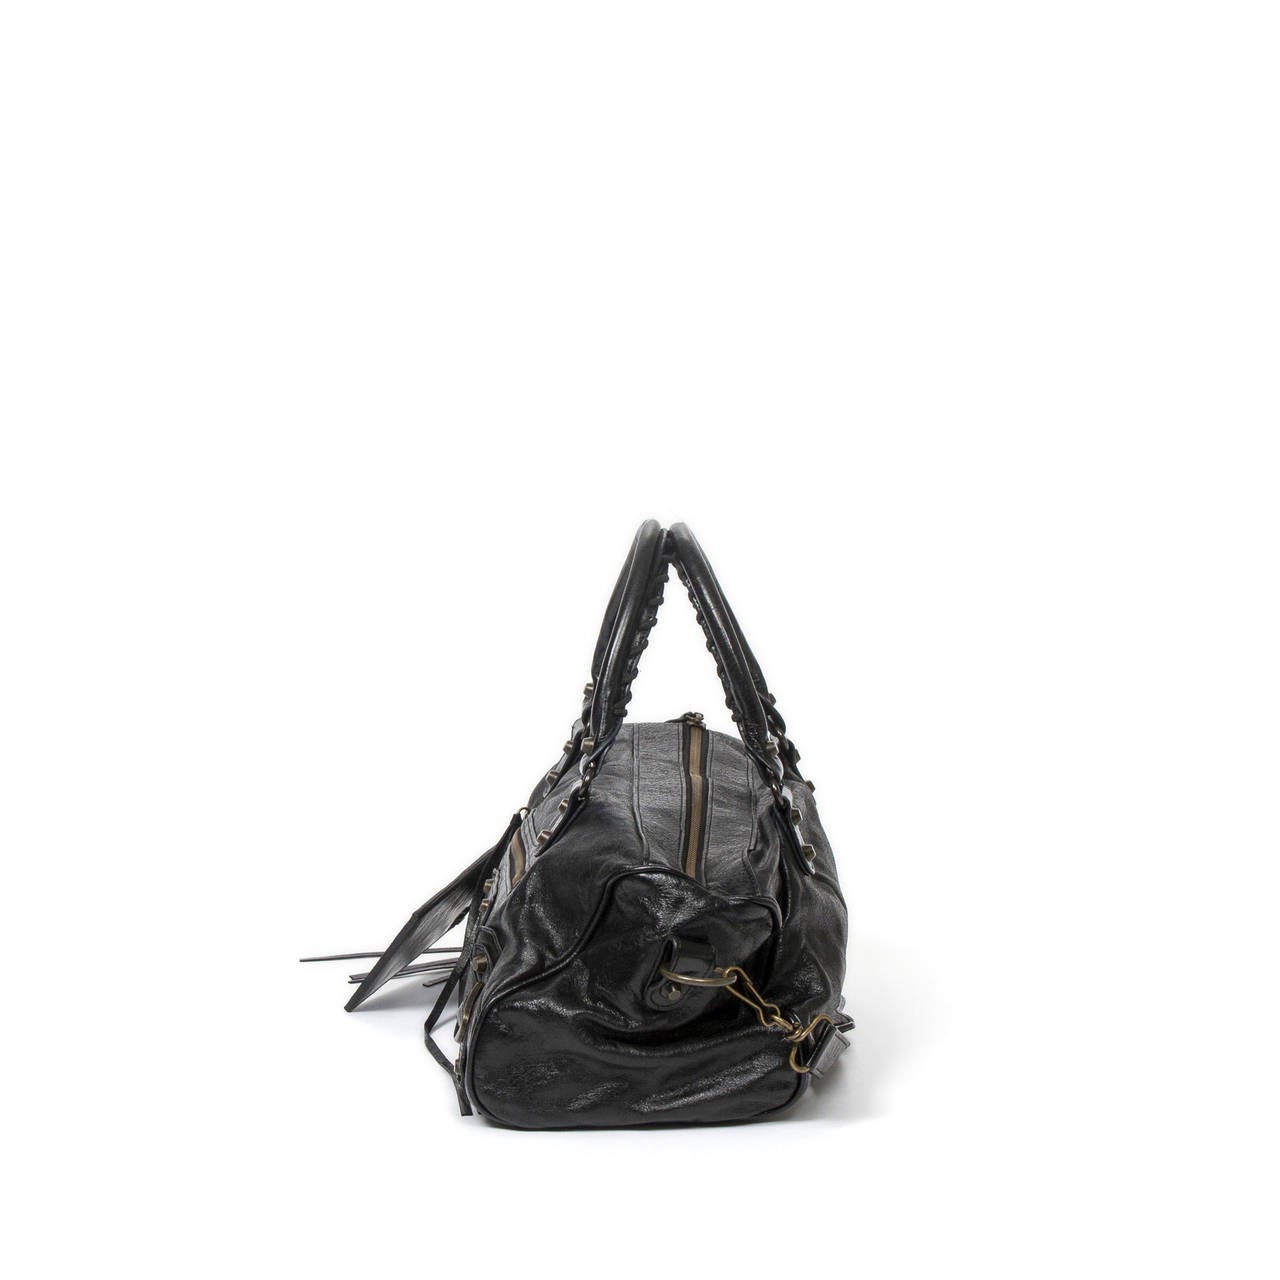 Women's Balenciaga City Bag Black Distressed Leather For Sale